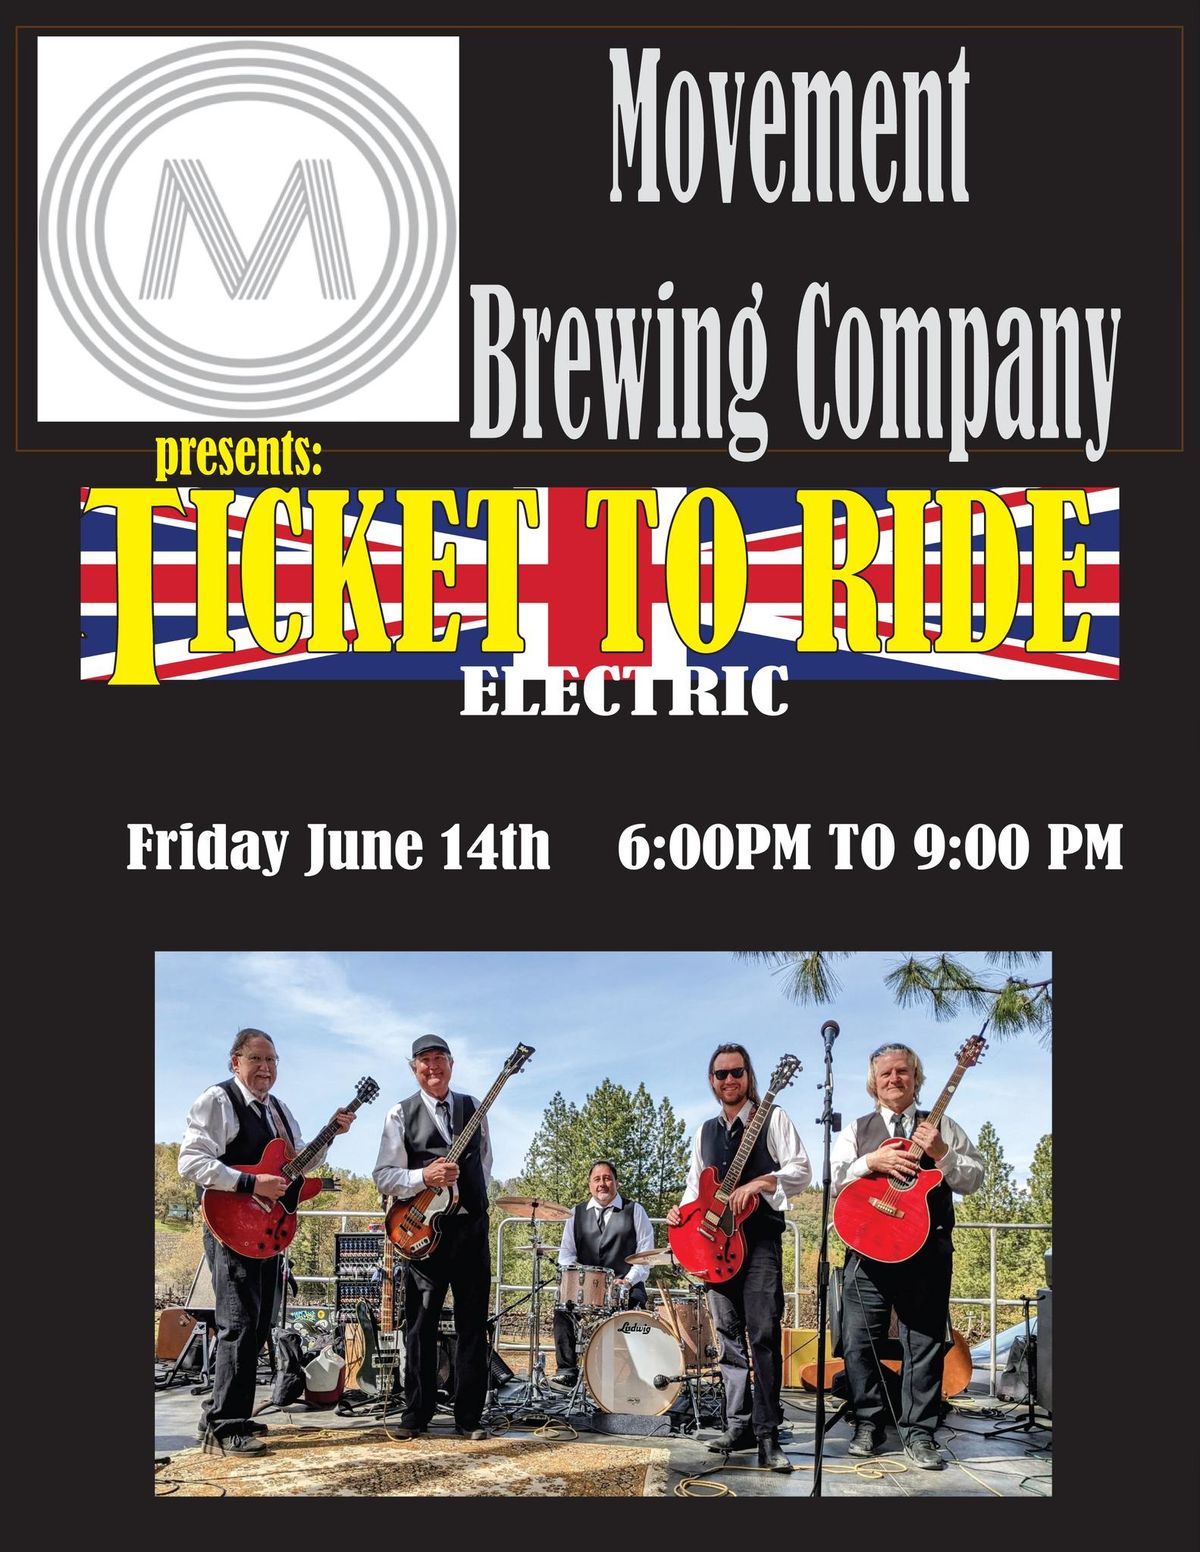 Beatles & Brew!! Ticket To Ride Electric at Movement Brewing Company, Friday June 14th! 6 to 9 PM!